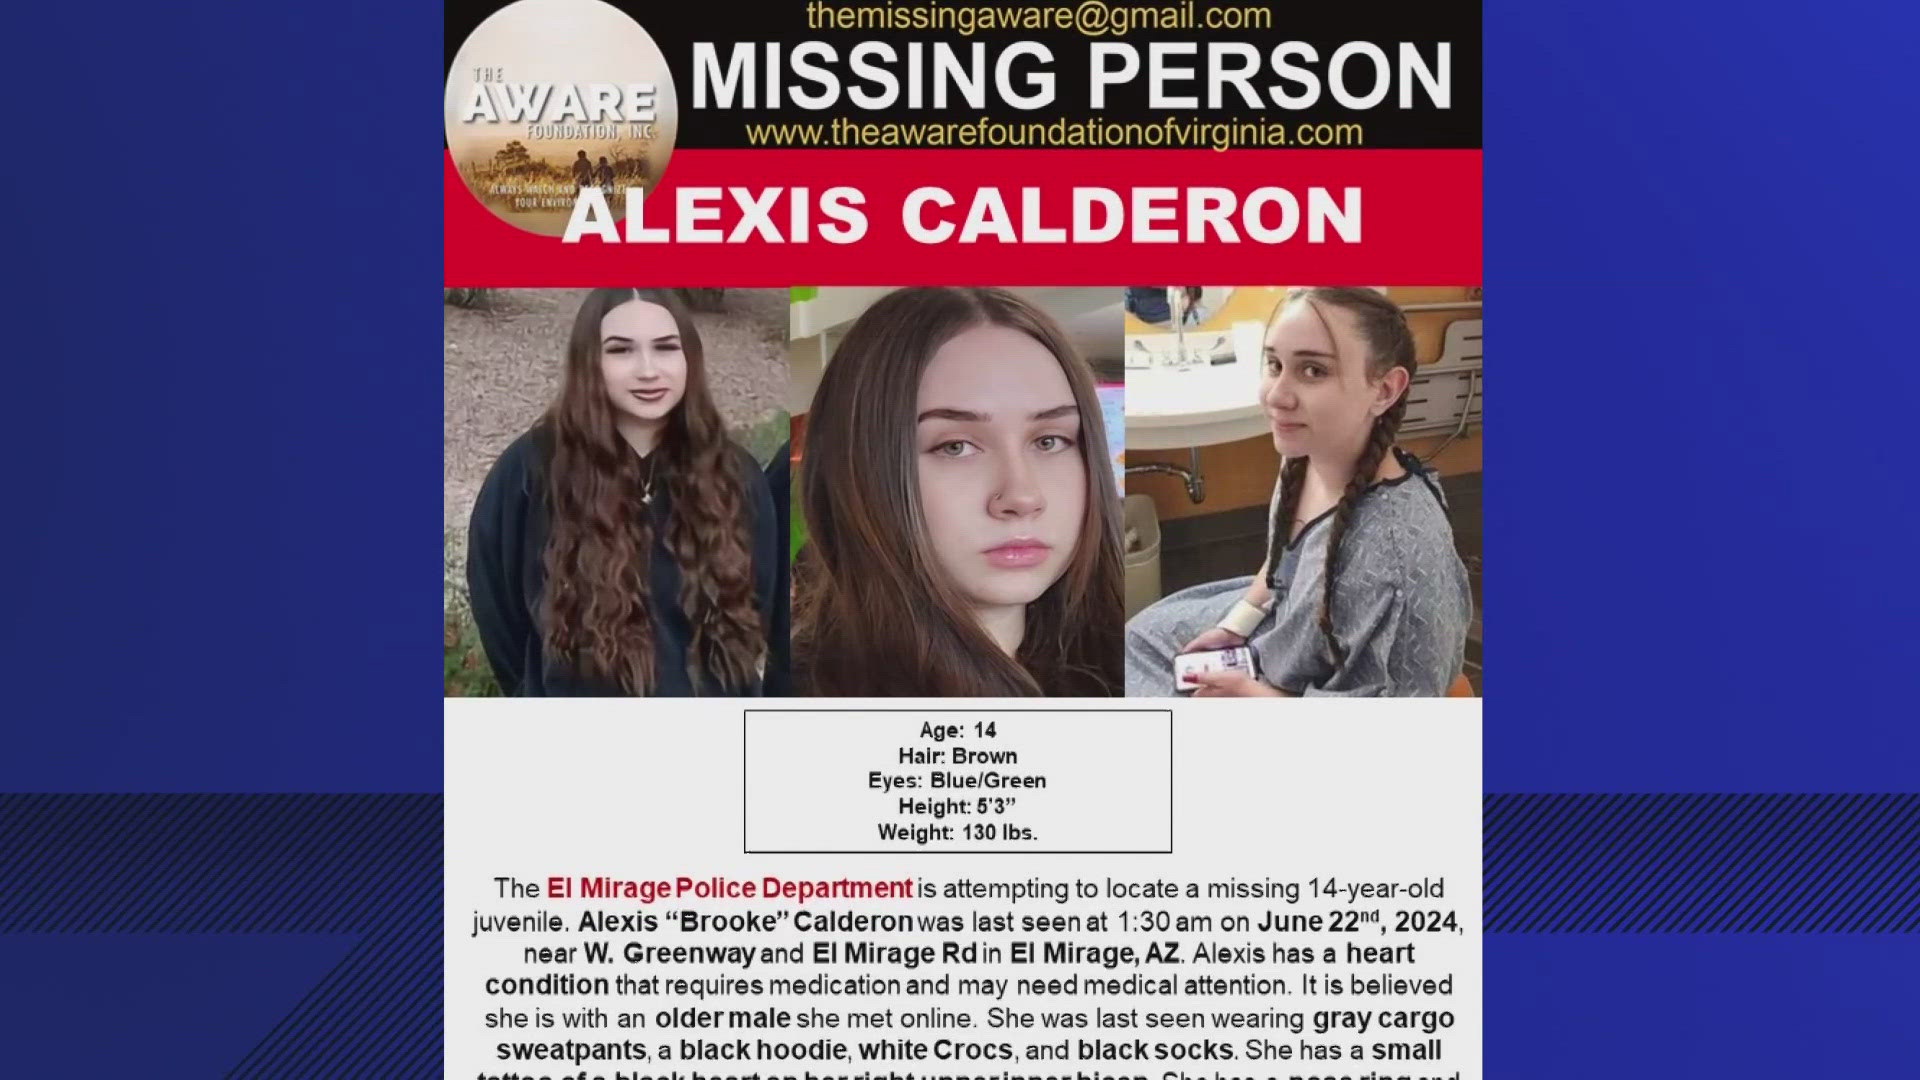 Surveillance cameras caught Alexis "Brooke" Calderon leaving the home near El Mirage and Greenway roads around 1 a.m. on June 22.